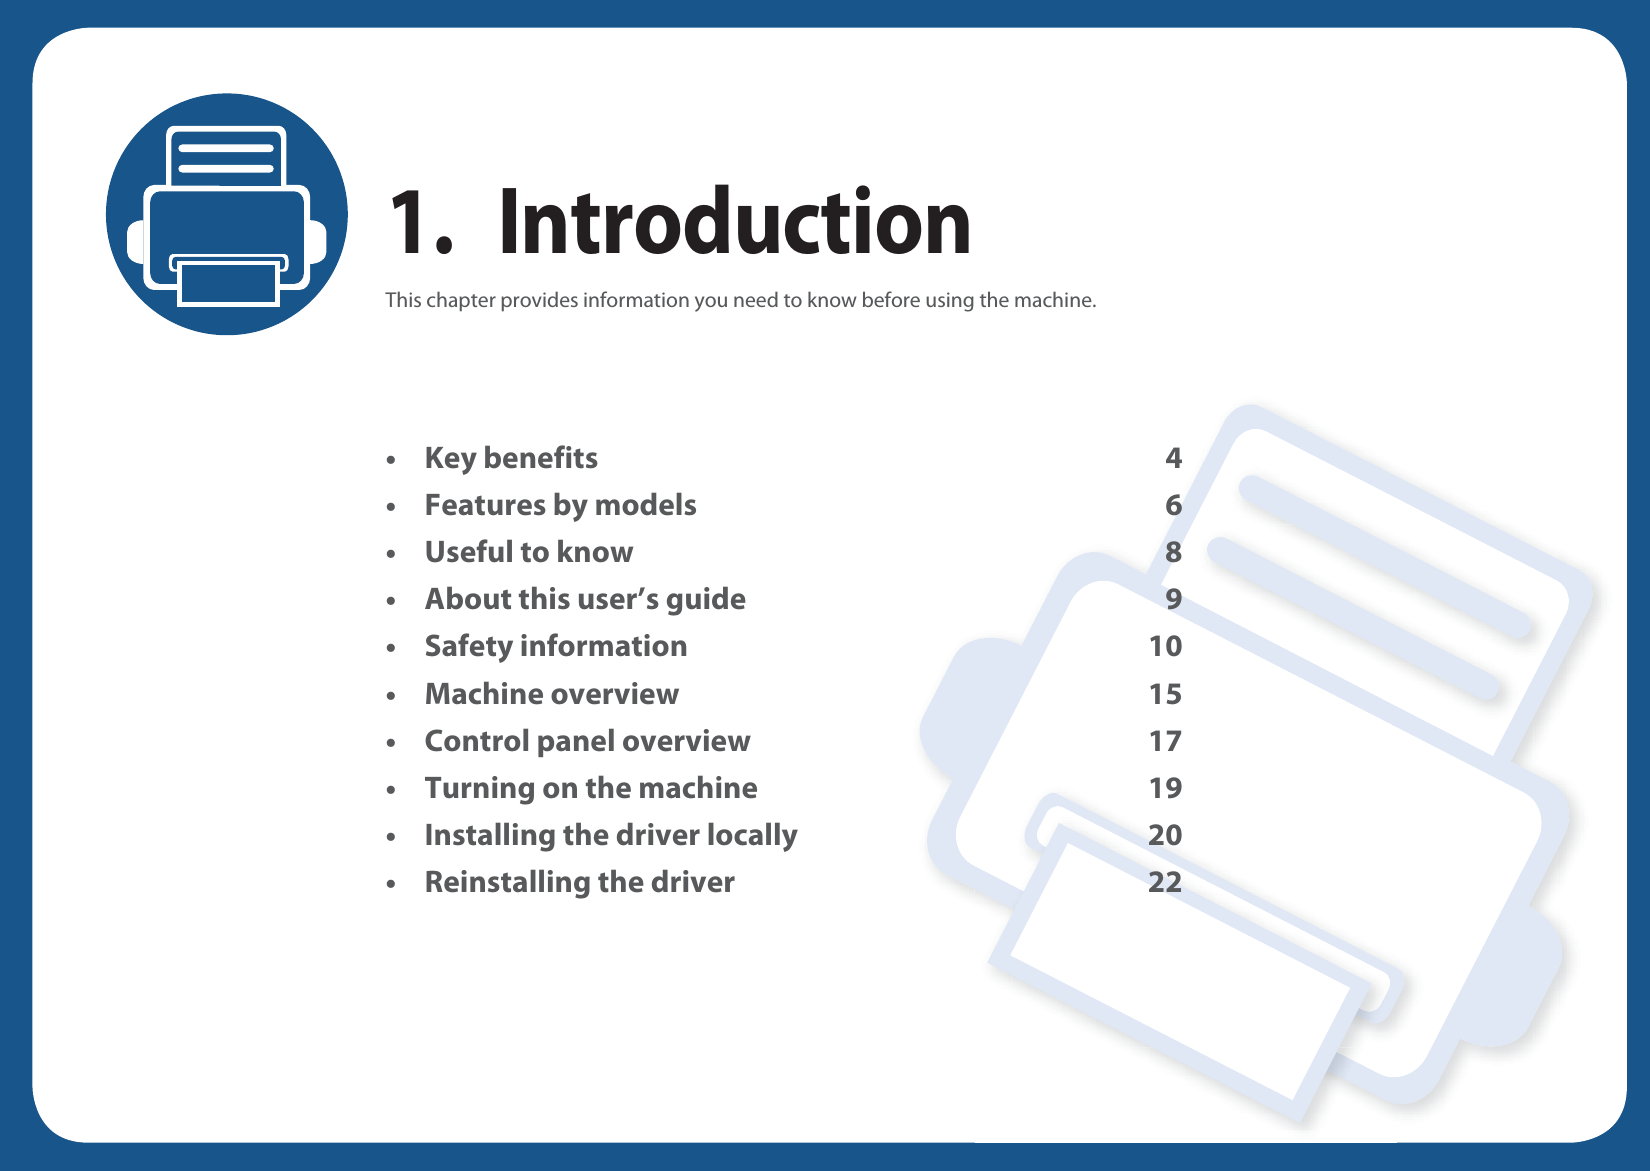 1. IntroductionThis chapter provides information you need to know before using the machine.• Key benefits 4• Features by models 6• Useful to know 8• About this user’s guide 9• Safety information 10• Machine overview 15• Control panel overview 17• Turning on the machine 19• Installing the driver locally 20• Reinstalling the driver 22